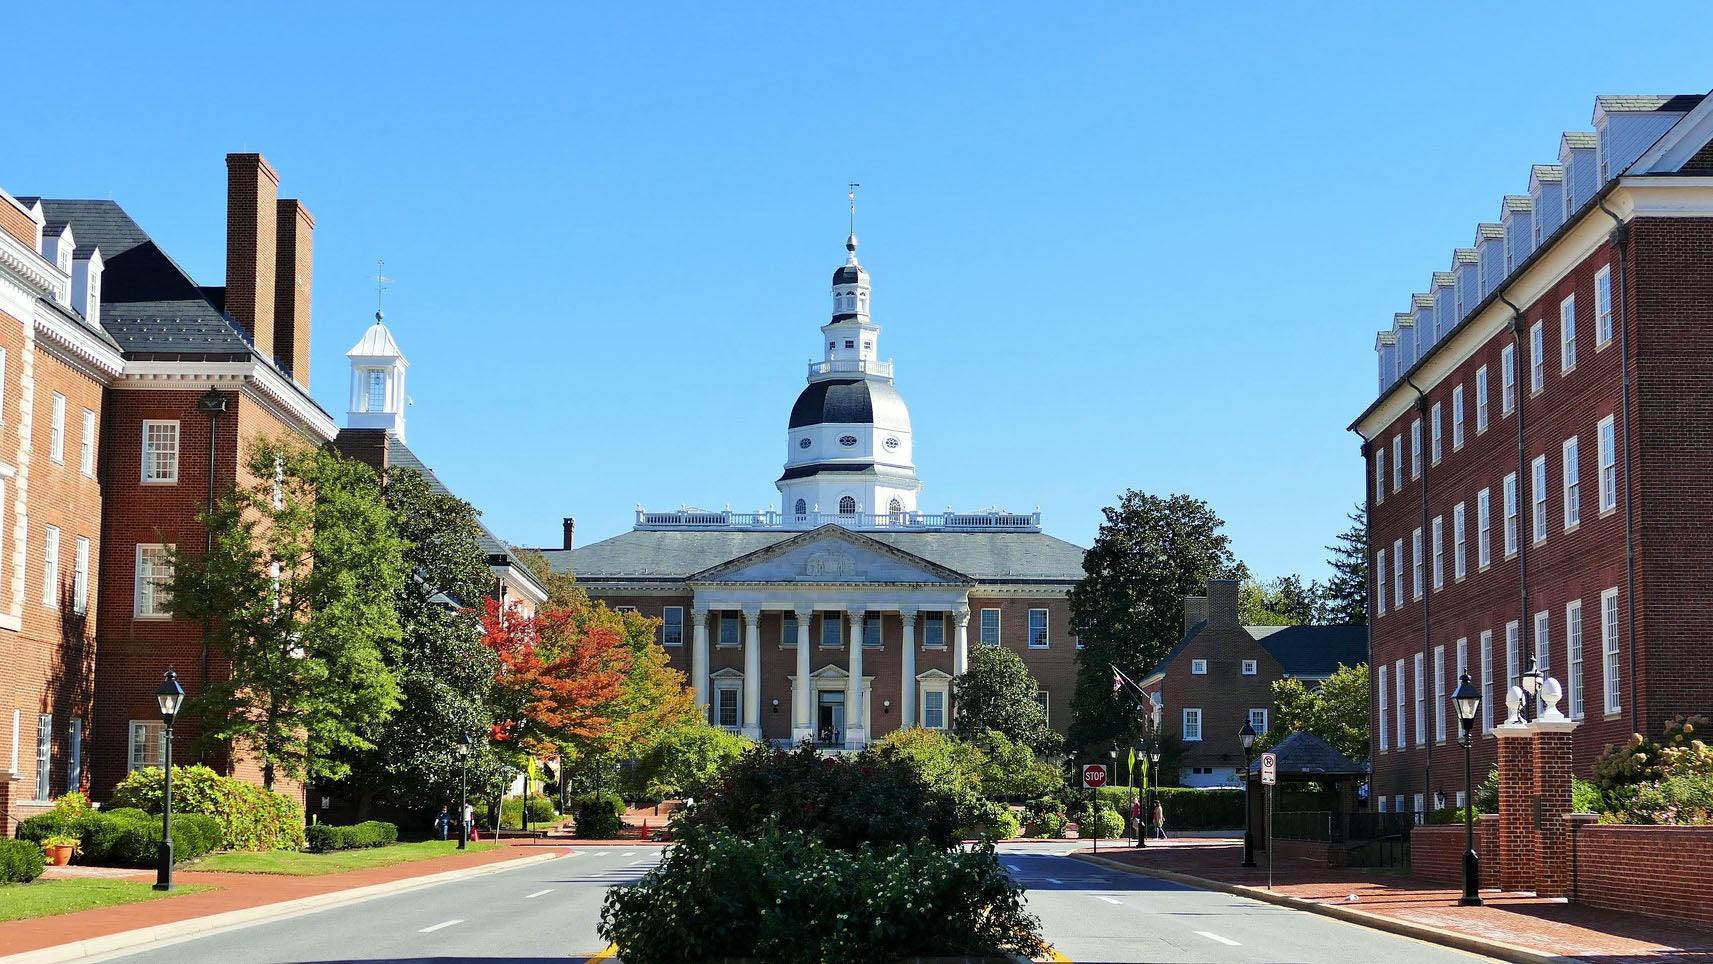 Maryland State House by Cuzco84/(CC BY-NC 2.0)